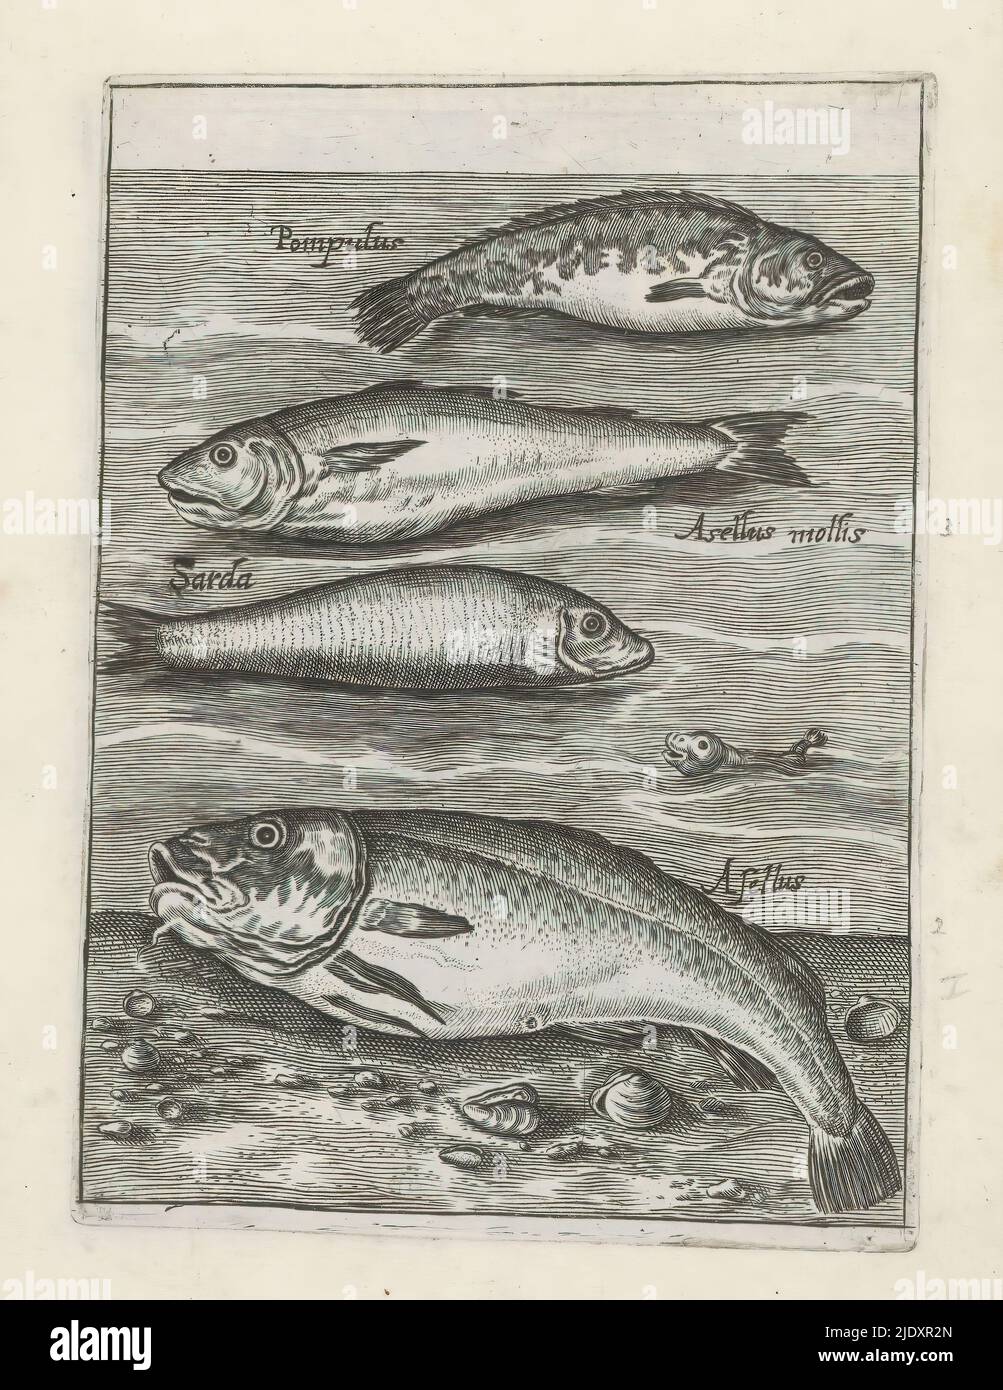 Pilot man, whiting, sarda and cod, Fish (series title), Piscium Vivae Icones (series title), Four fish. From top to bottom a pilot, whiting, sarda and cod. Each fish has its name in Latin. This print is part of an album., print maker: anonymous, print maker: Crispijn van de Passe (I), (rejected attribution), after design by: Adriaen Collaert, Utrecht, 1635 - 1660, paper, engraving, height 123 mm × width 89 mm Stock Photo